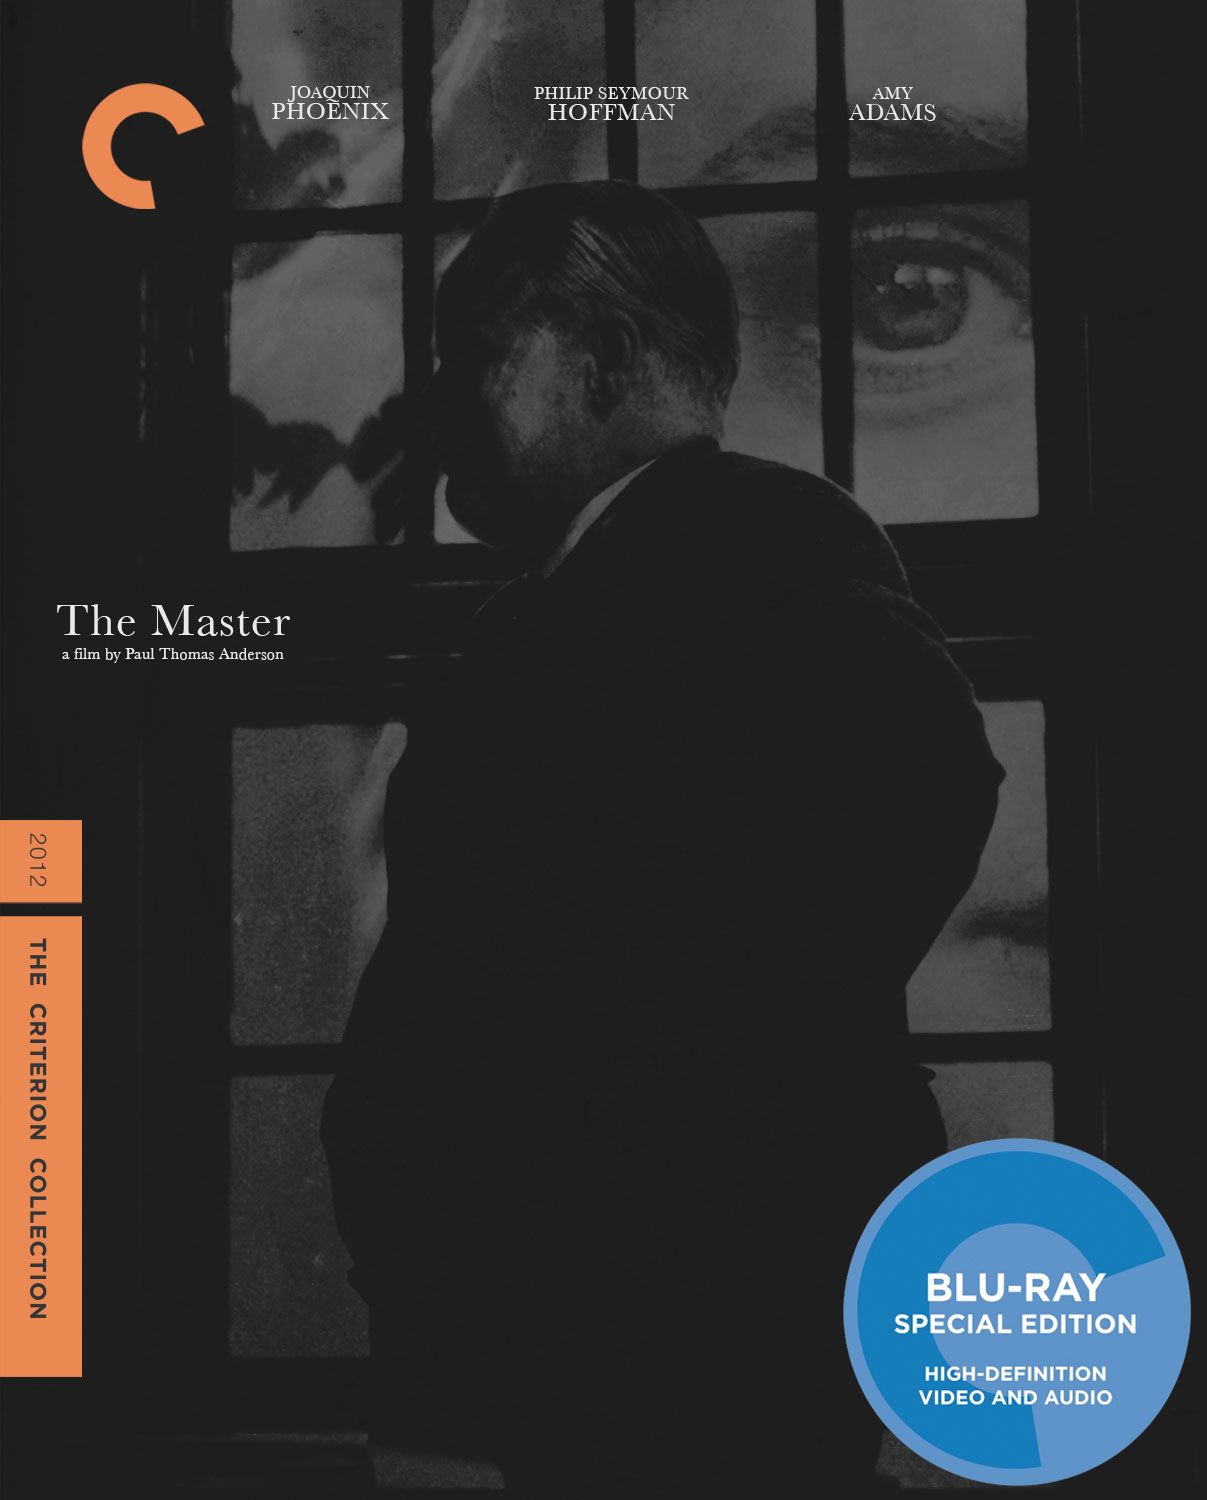 The Criterion Collection - The Master - Cover Design #2